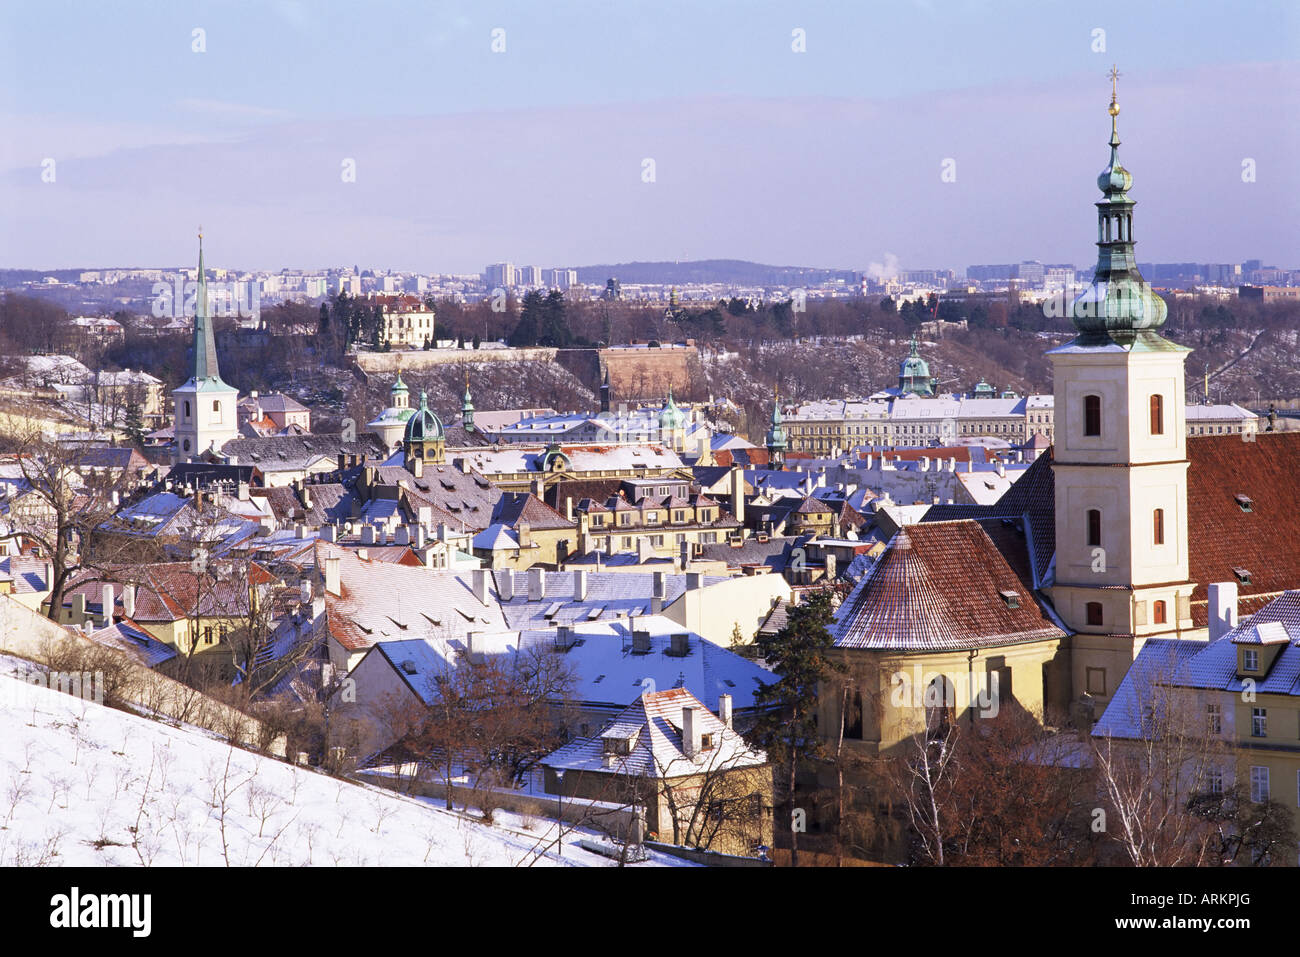 Snow covered Baroque church of Our Lady Victorious, and rooftops of Mala Strana suburb, Hradcany, Prague, Czech Republic Stock Photo